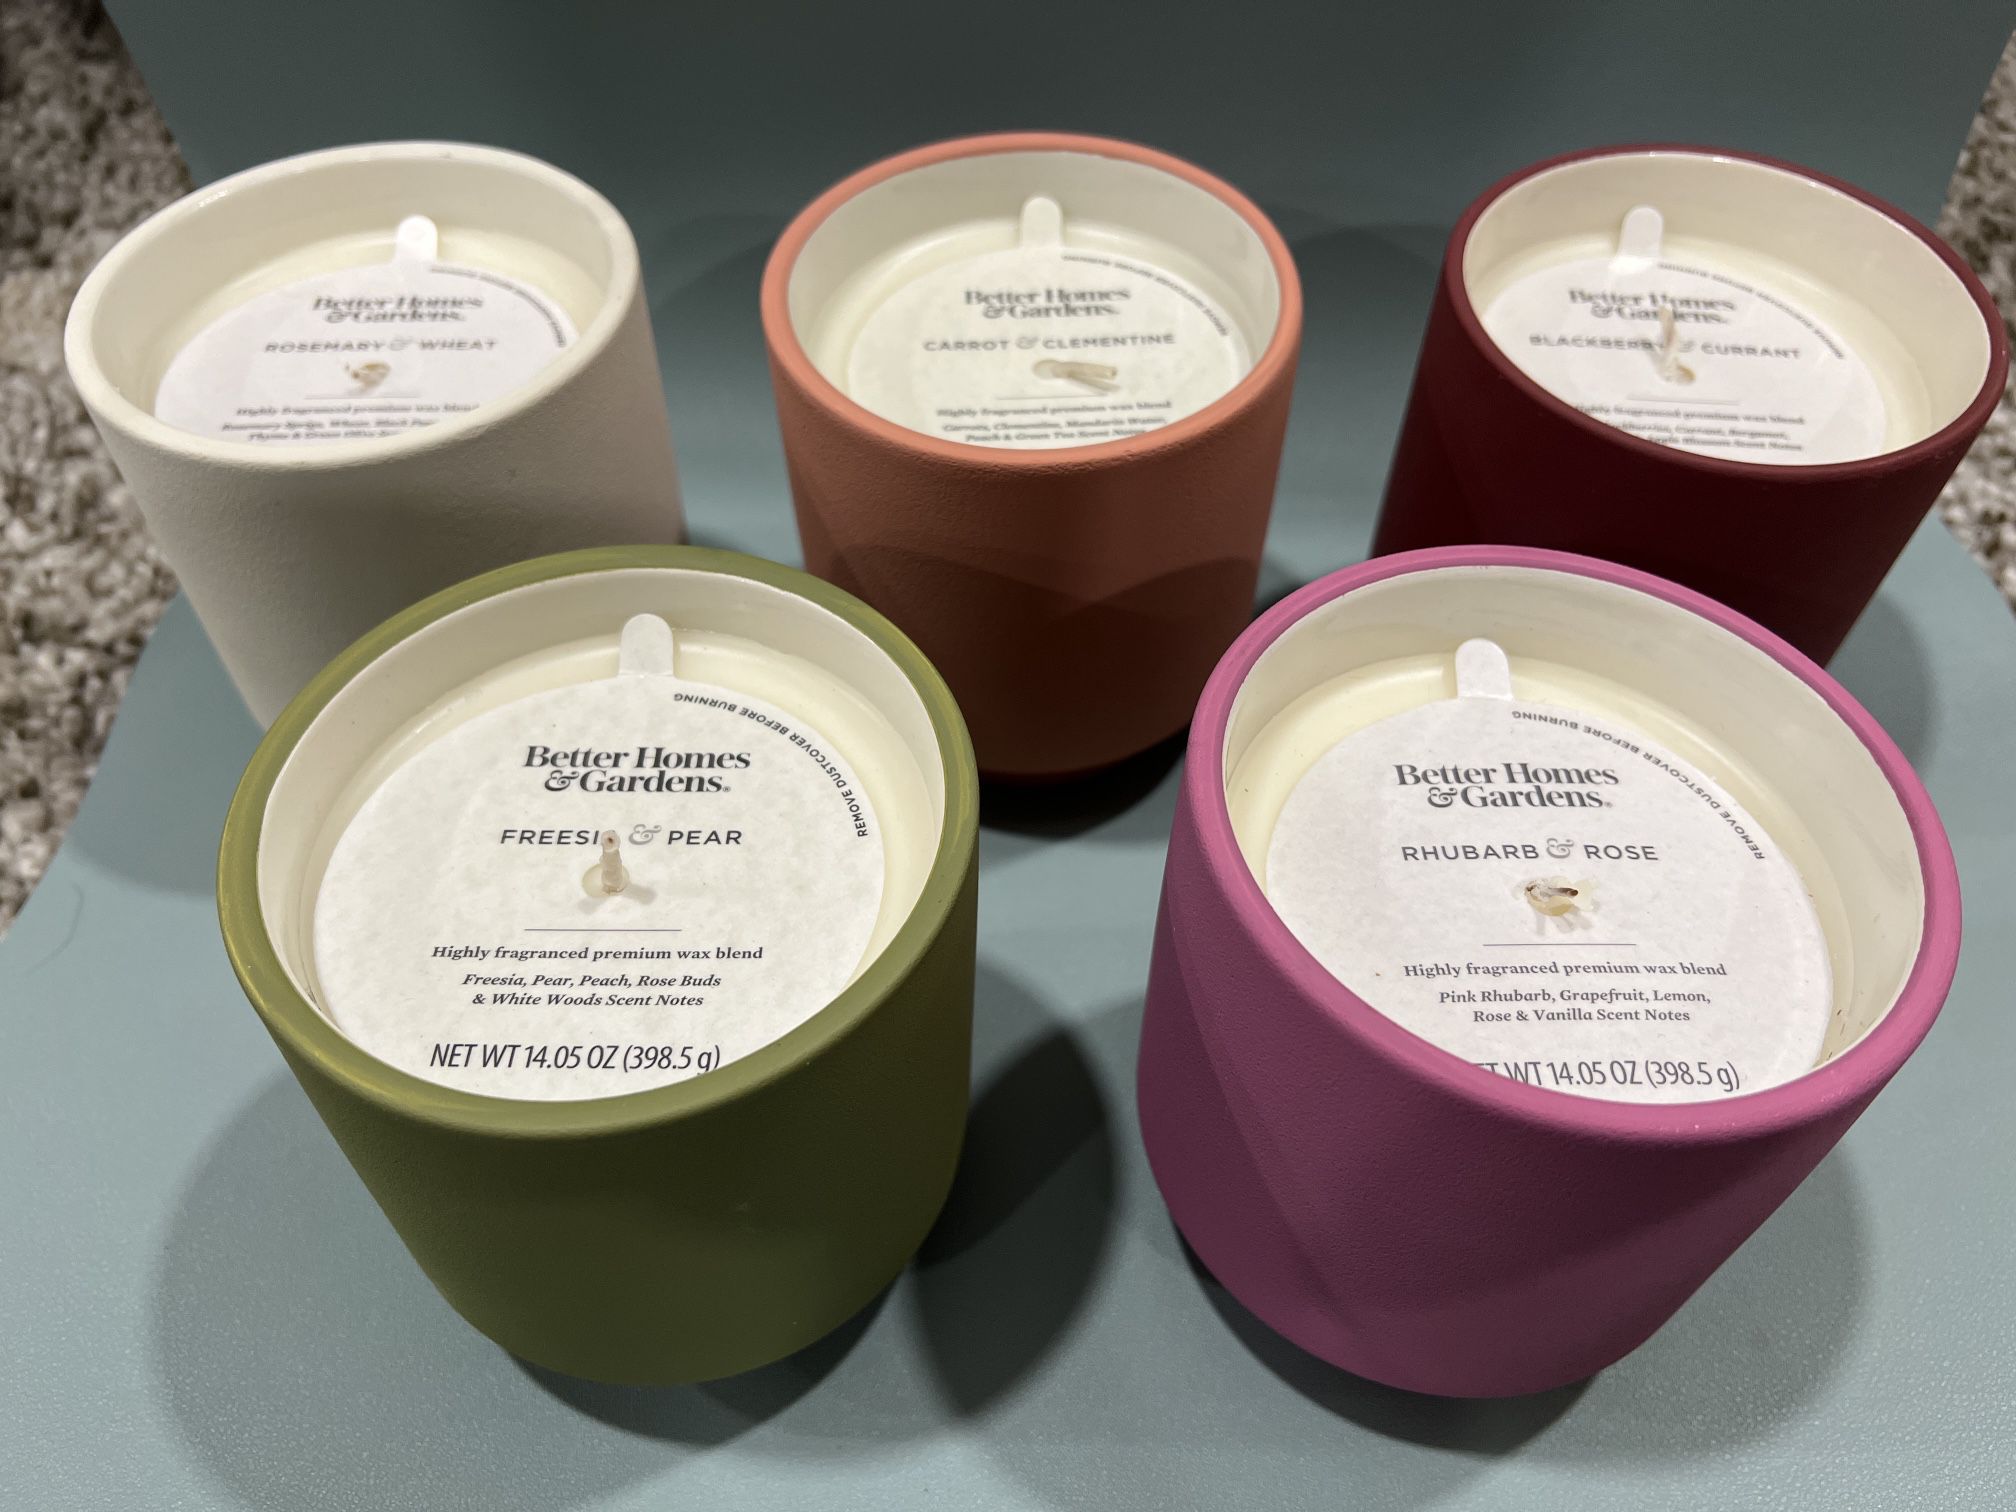 Brand New Better Homes And Gardens Scented Candles - $5 Each